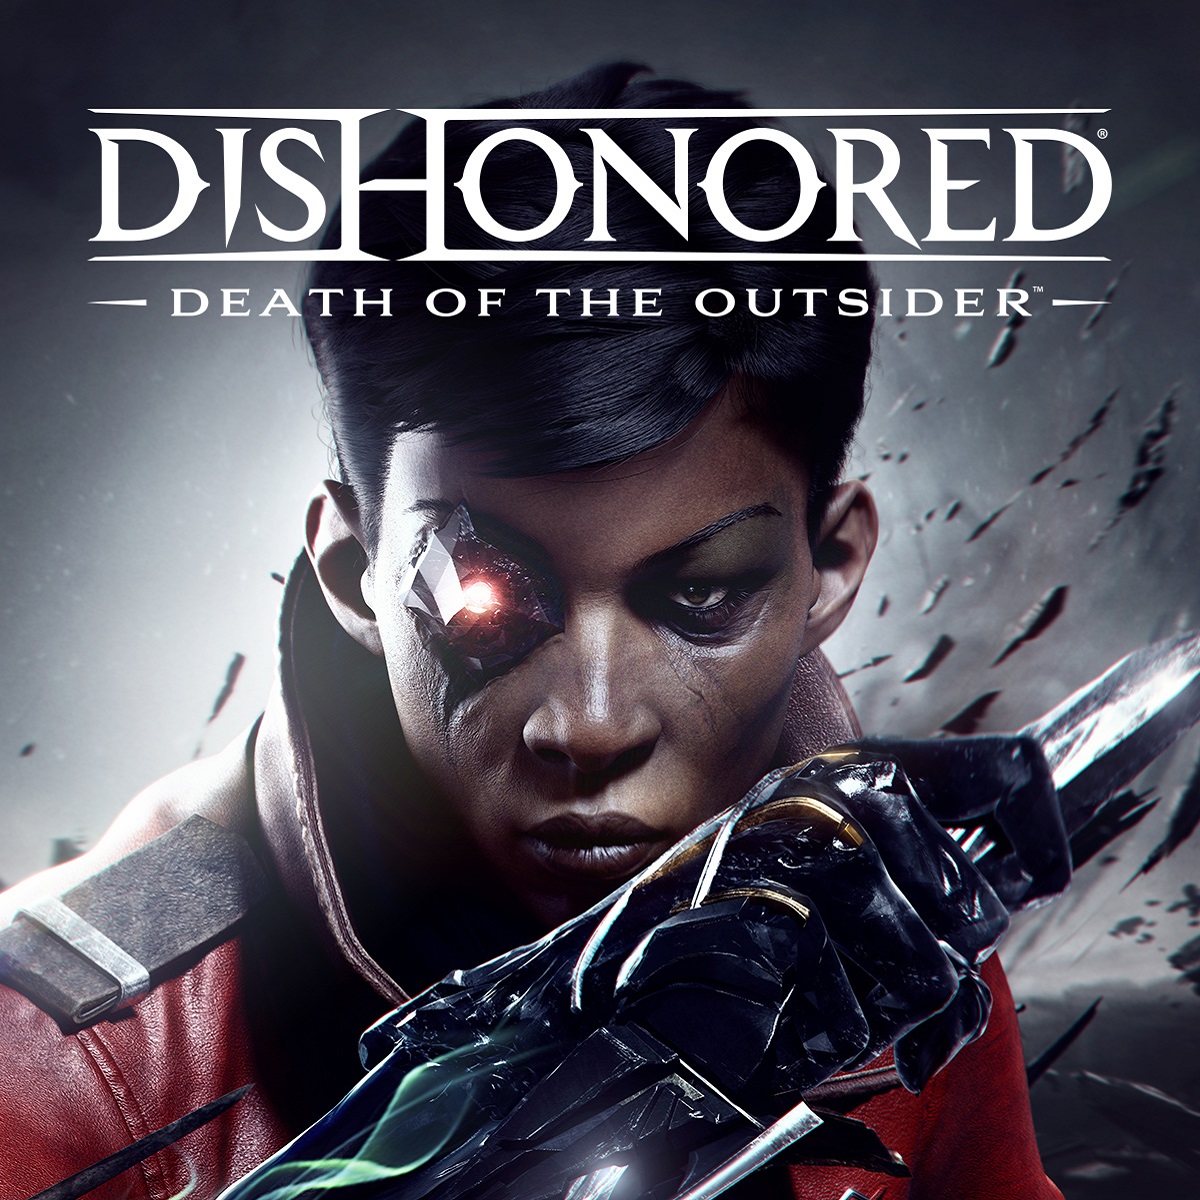 Nieuwe gameplaytrailer voor Dishonored: Death of the Outsider